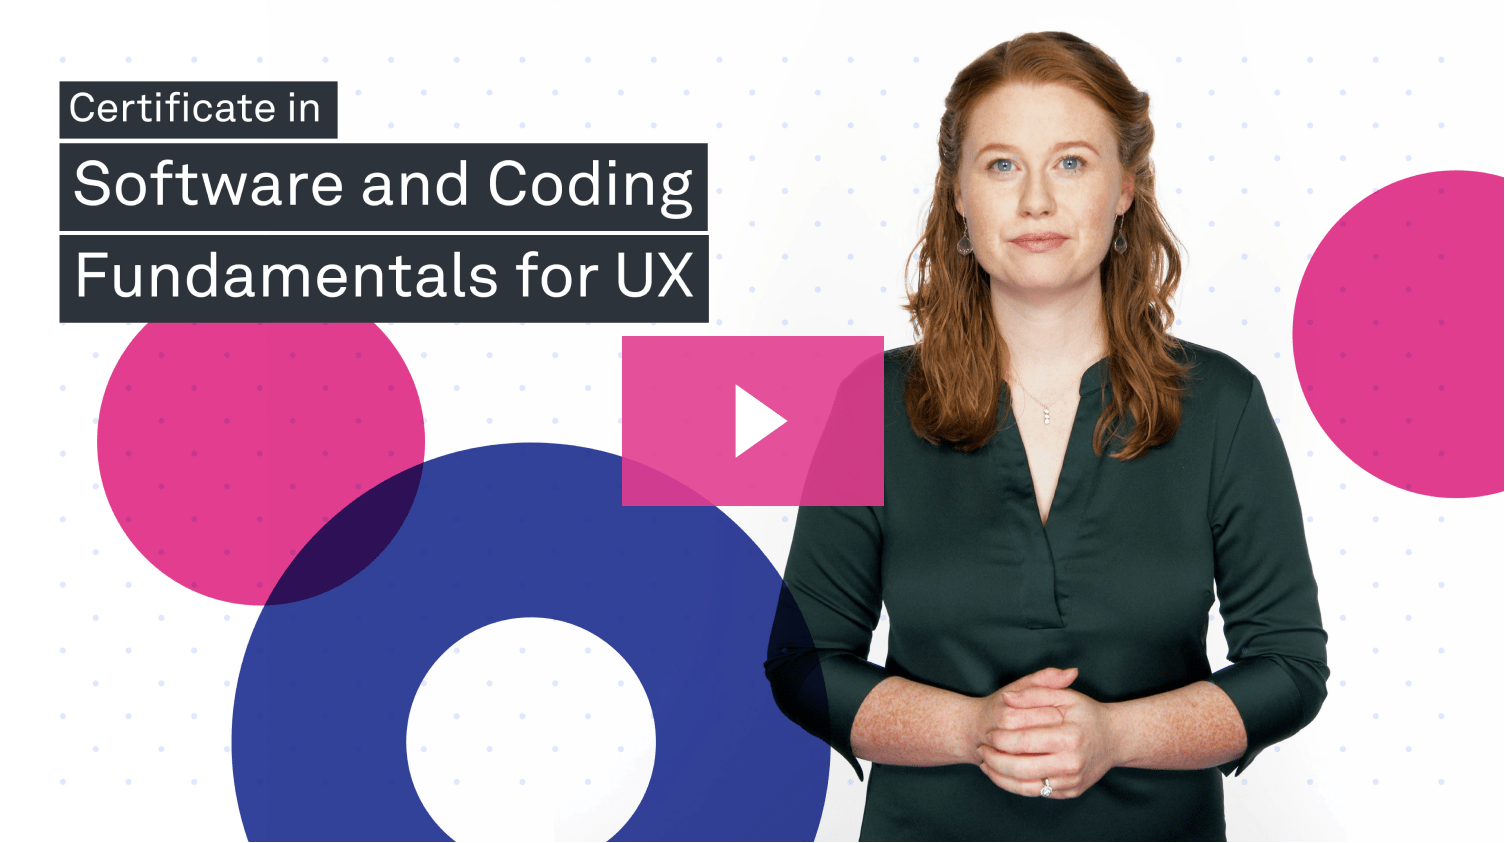 Software and Coding Fundamentals for UX